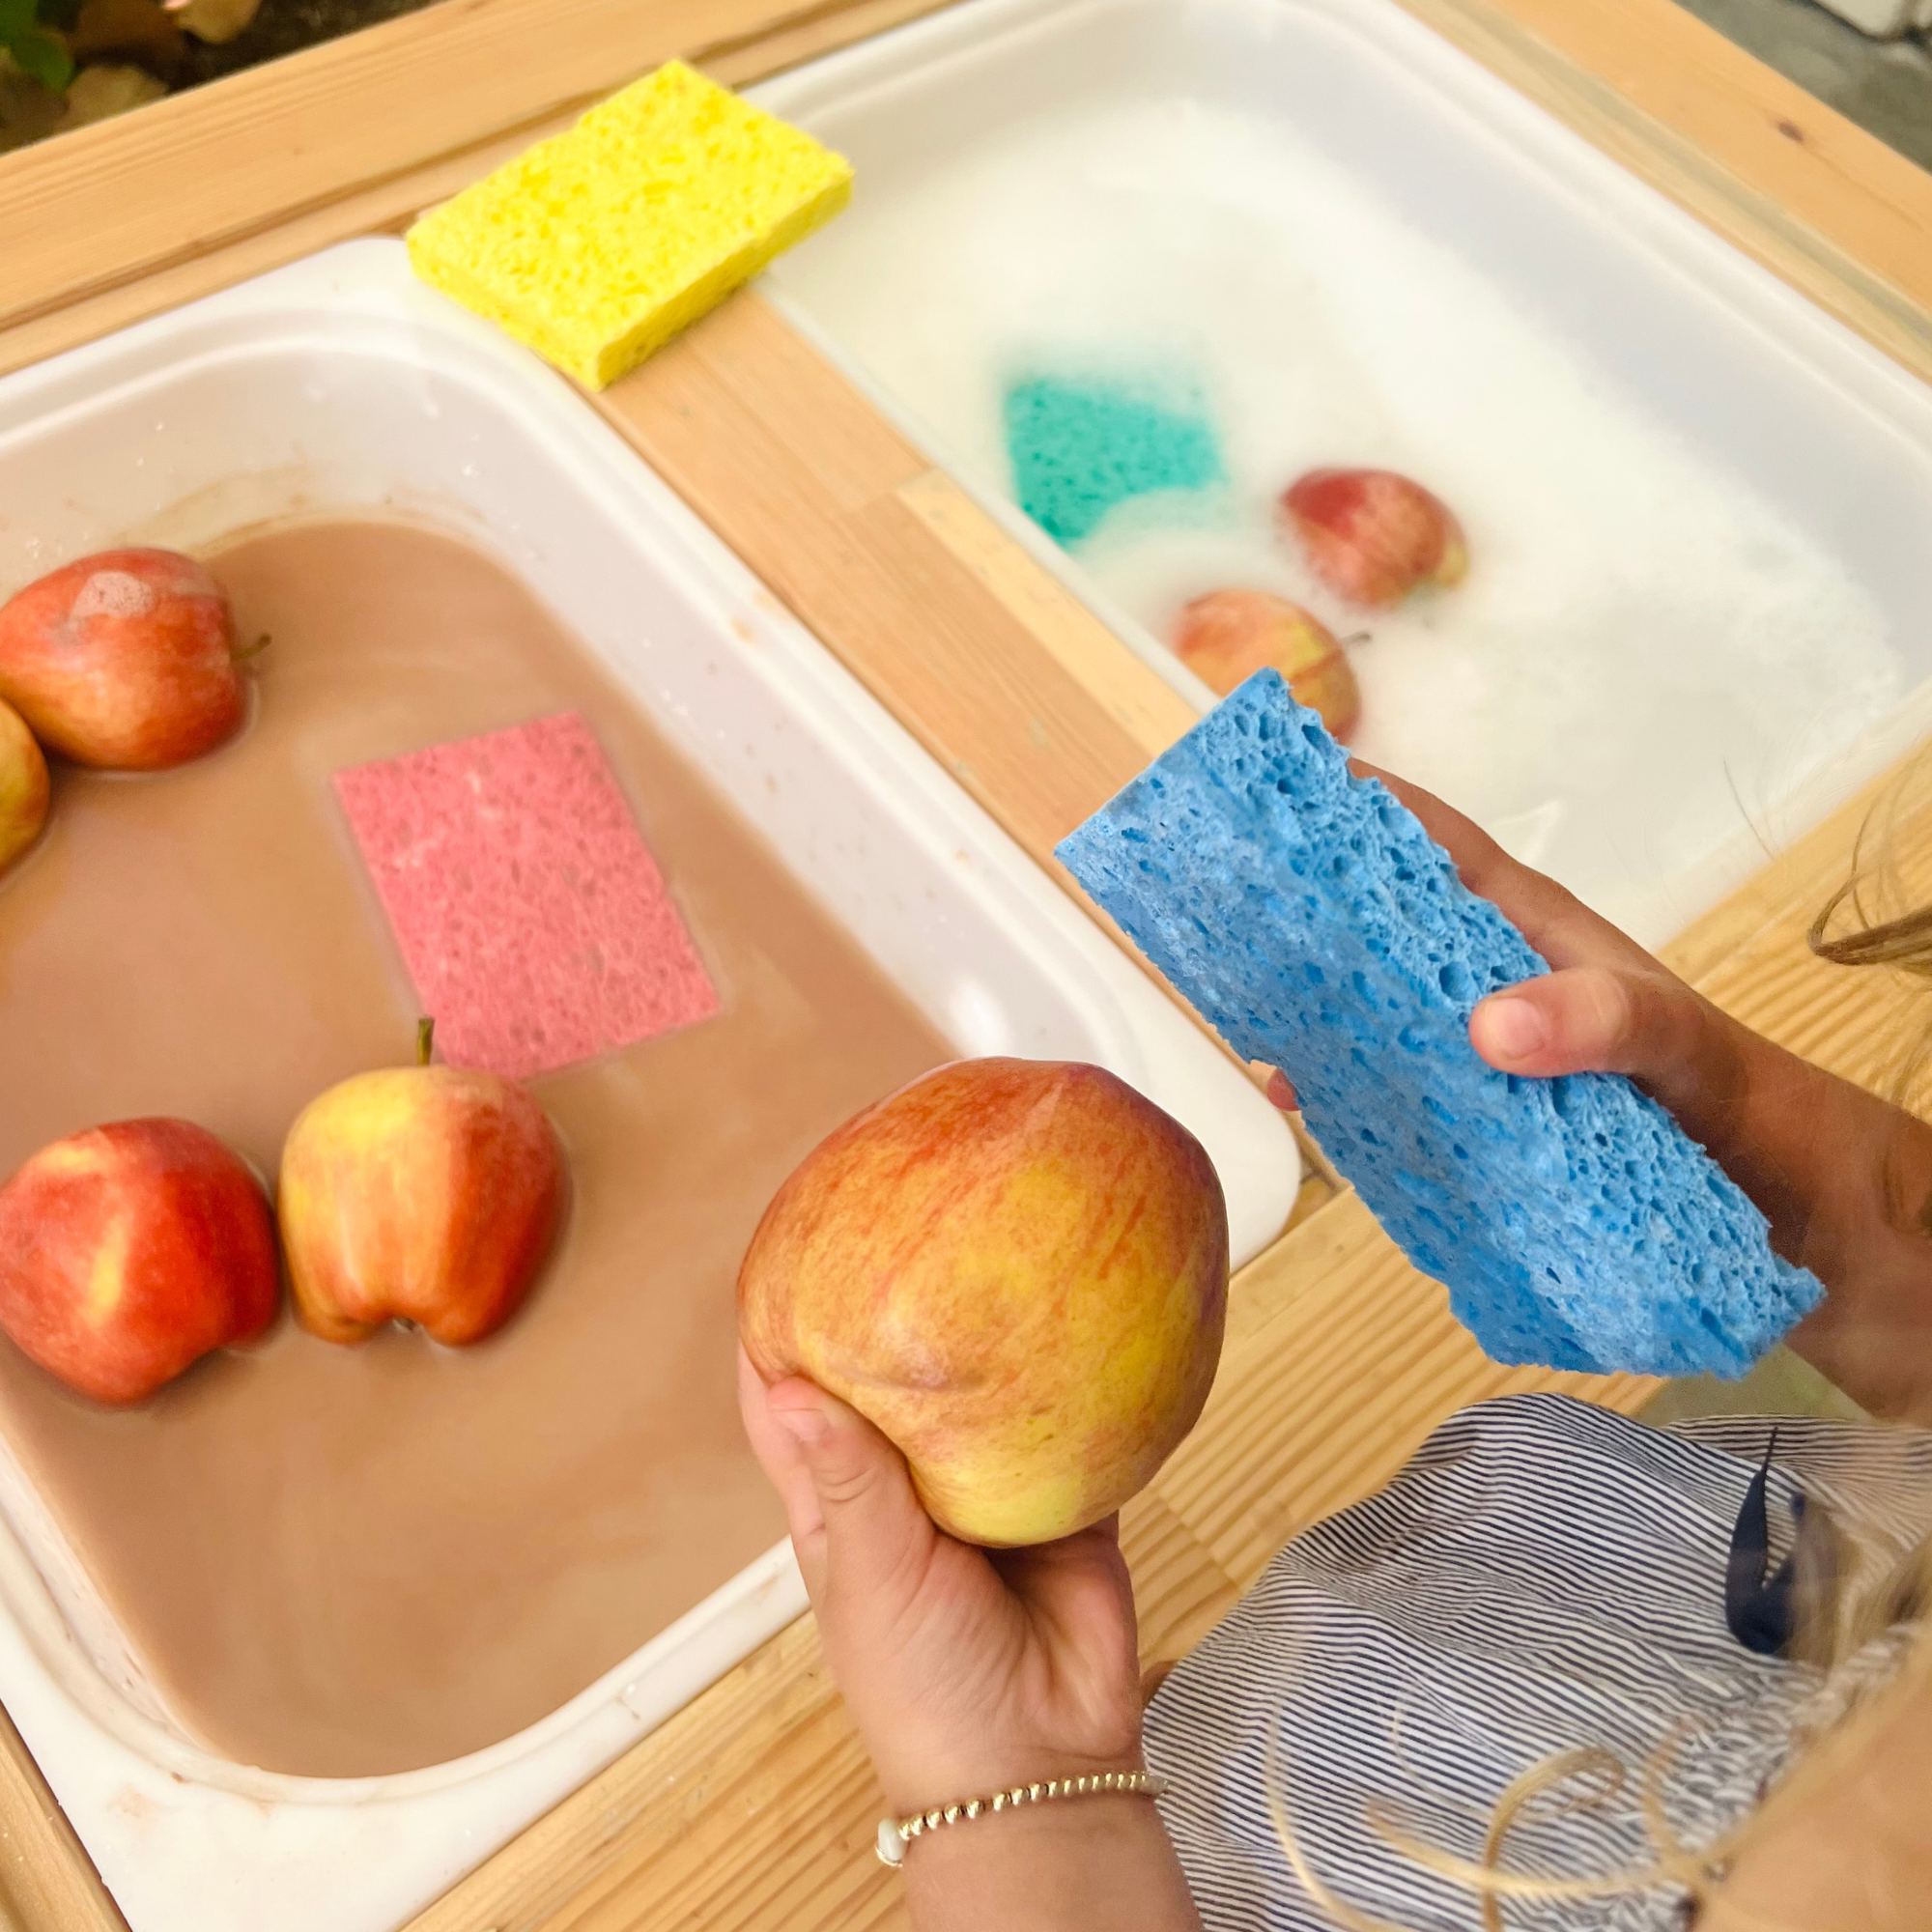 5 Sensory Bins Ideas for Fall With an Apple Theme for Your Preschool Classroom